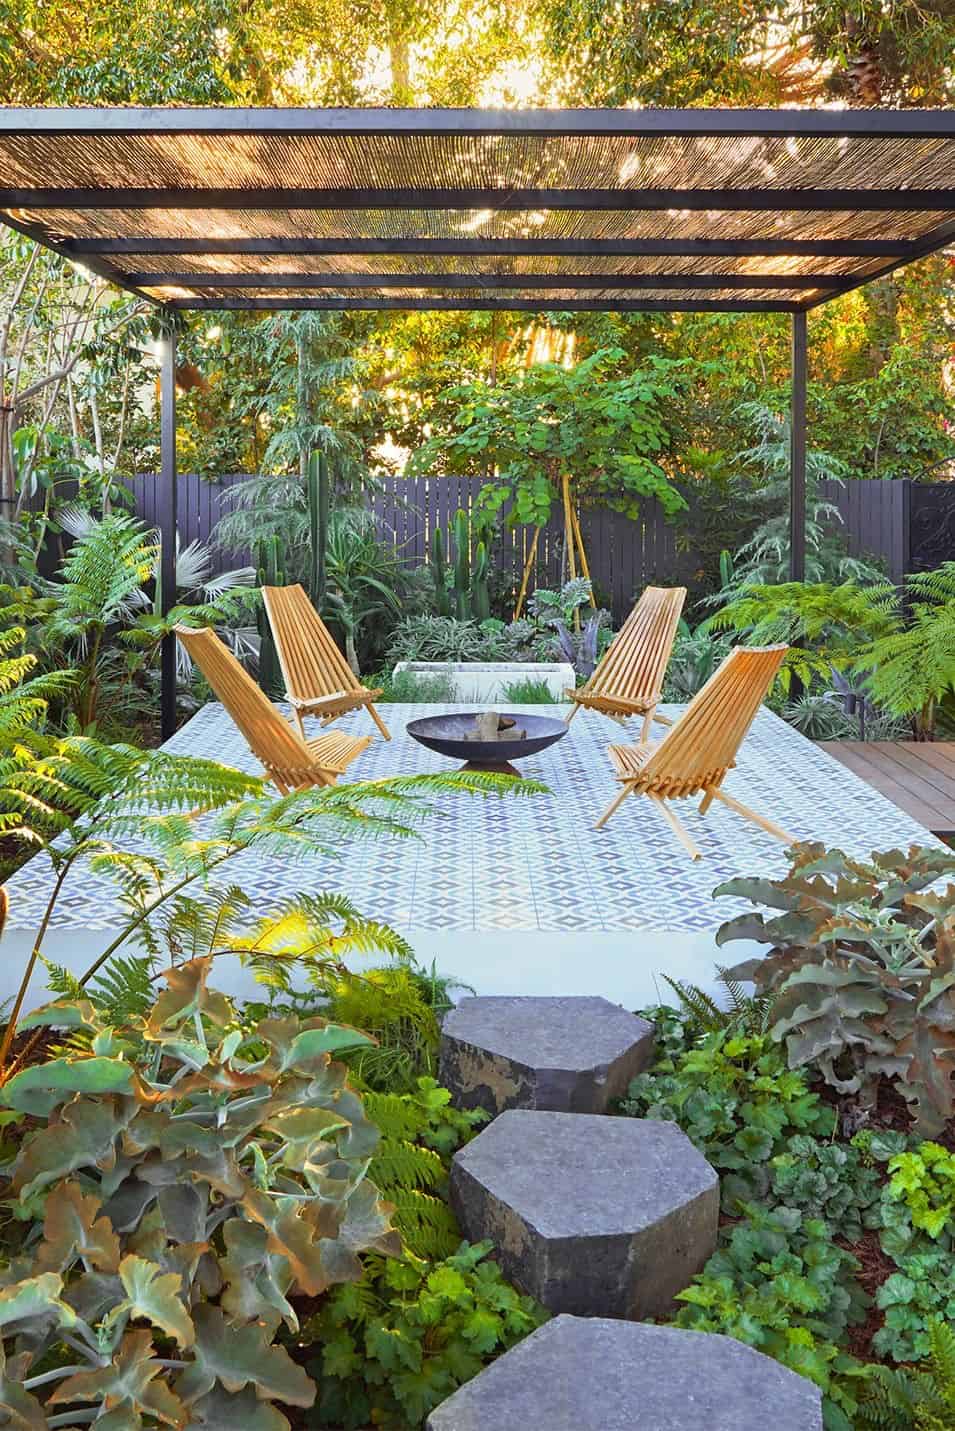 Inspirational patio and deck ideas